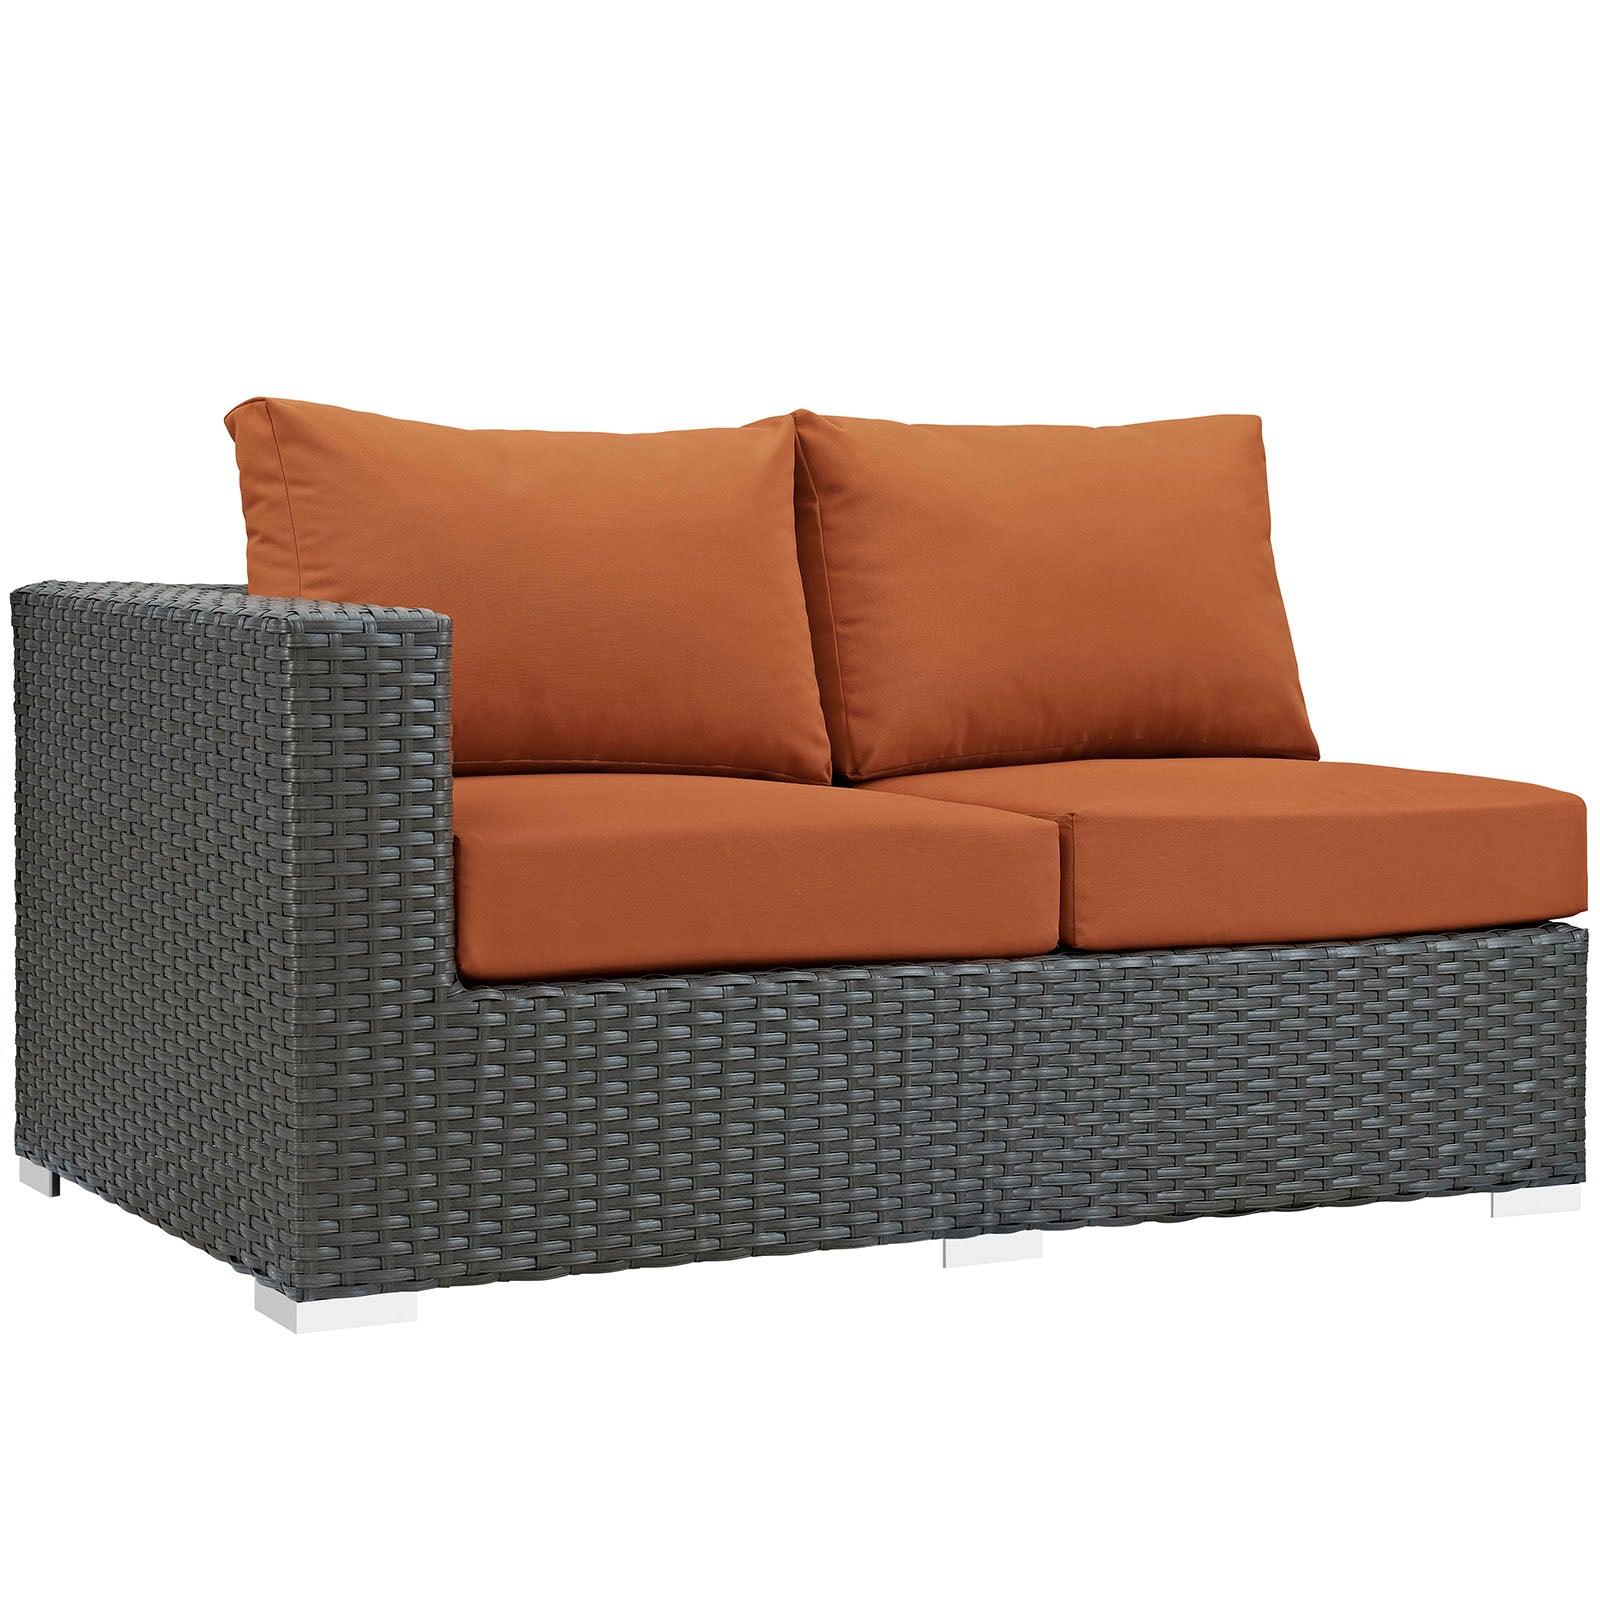 Modway Sojourn Outdoor Patio Sunbrella® Left Arm Loveseat FredCo